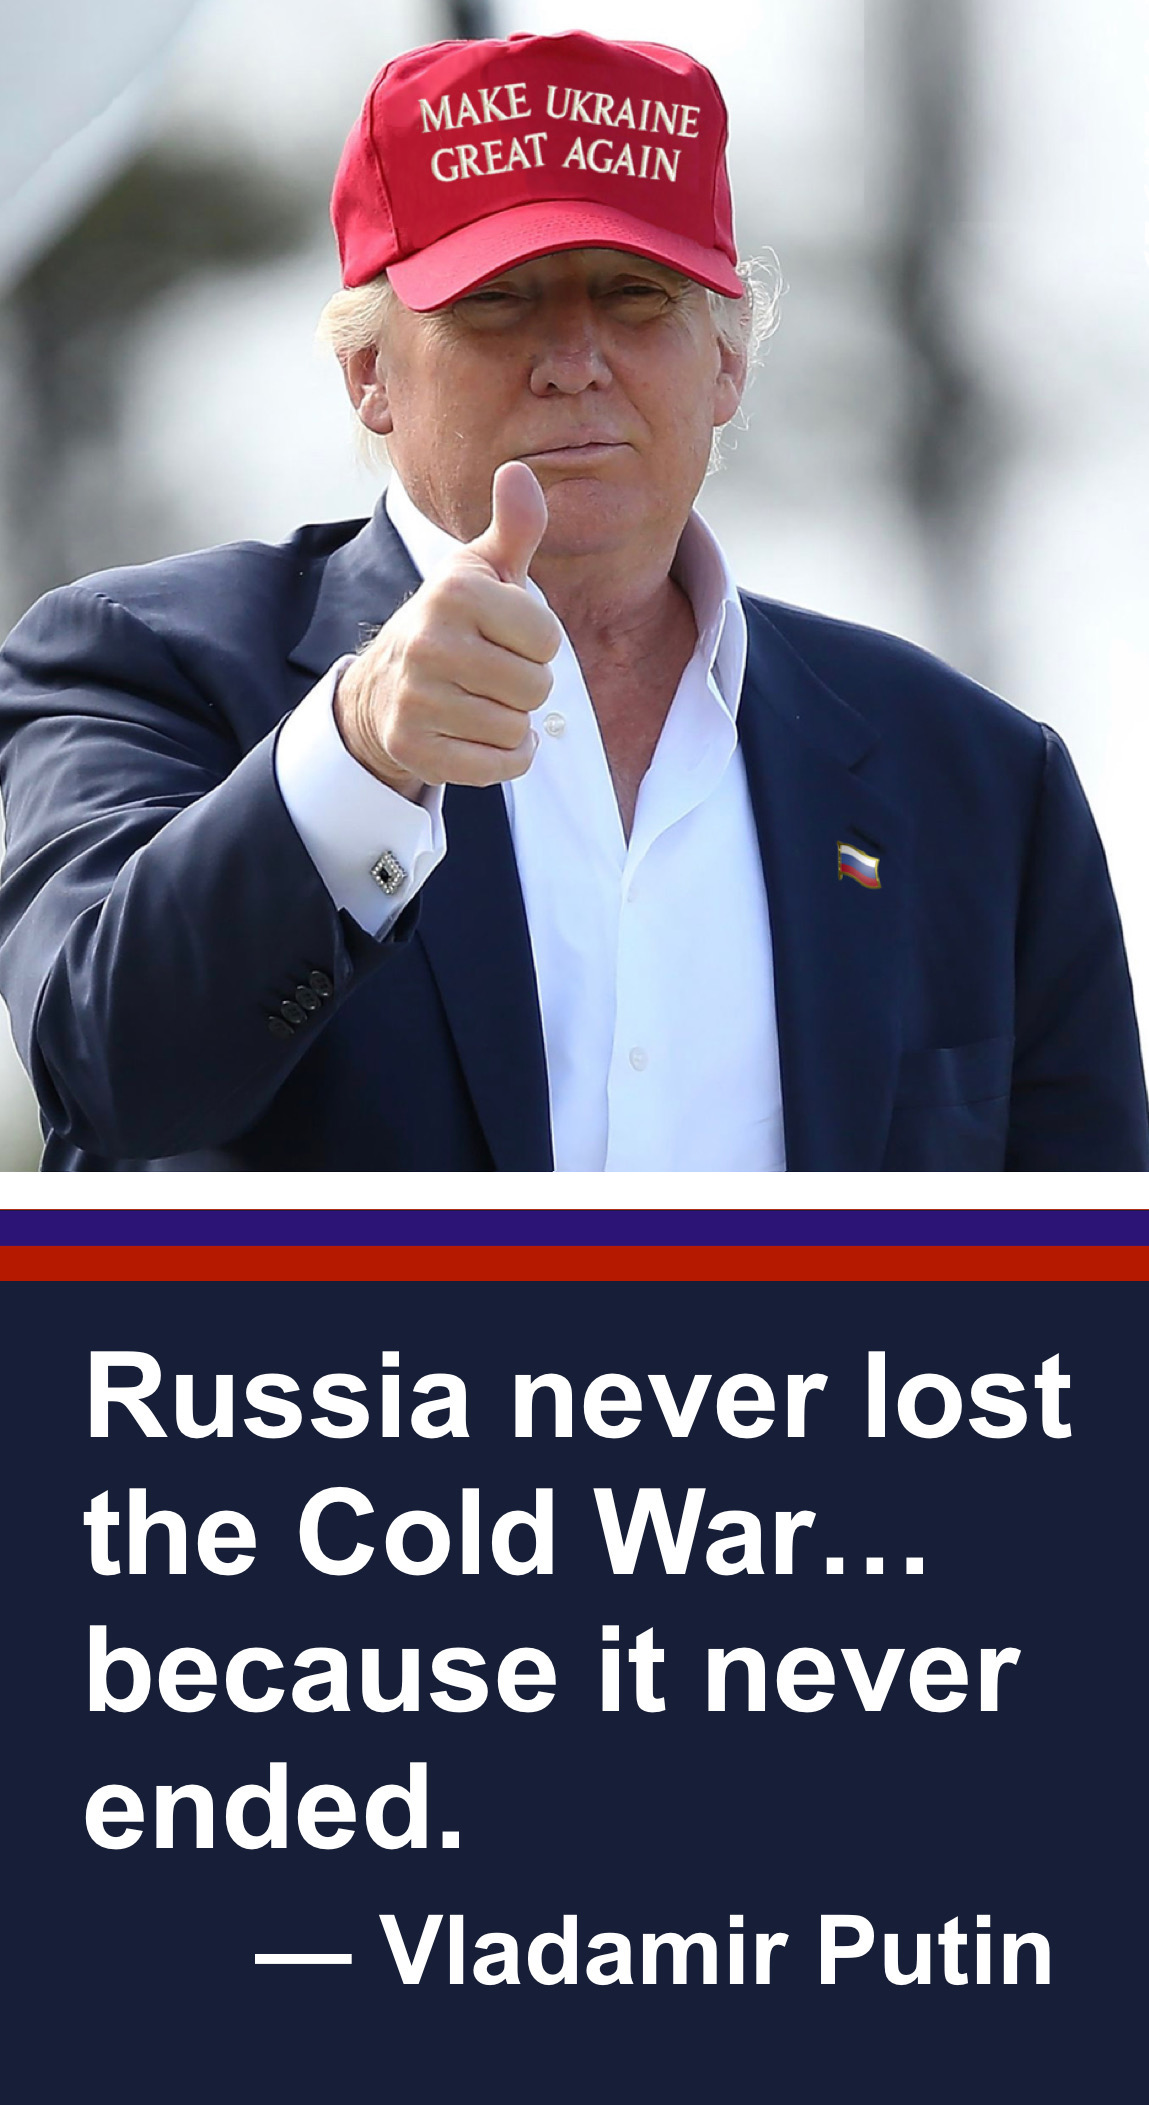 RUSSIA NEVER LOST THE COLD WAR BECAUSE IT NEVER ENDED Blank Meme Template